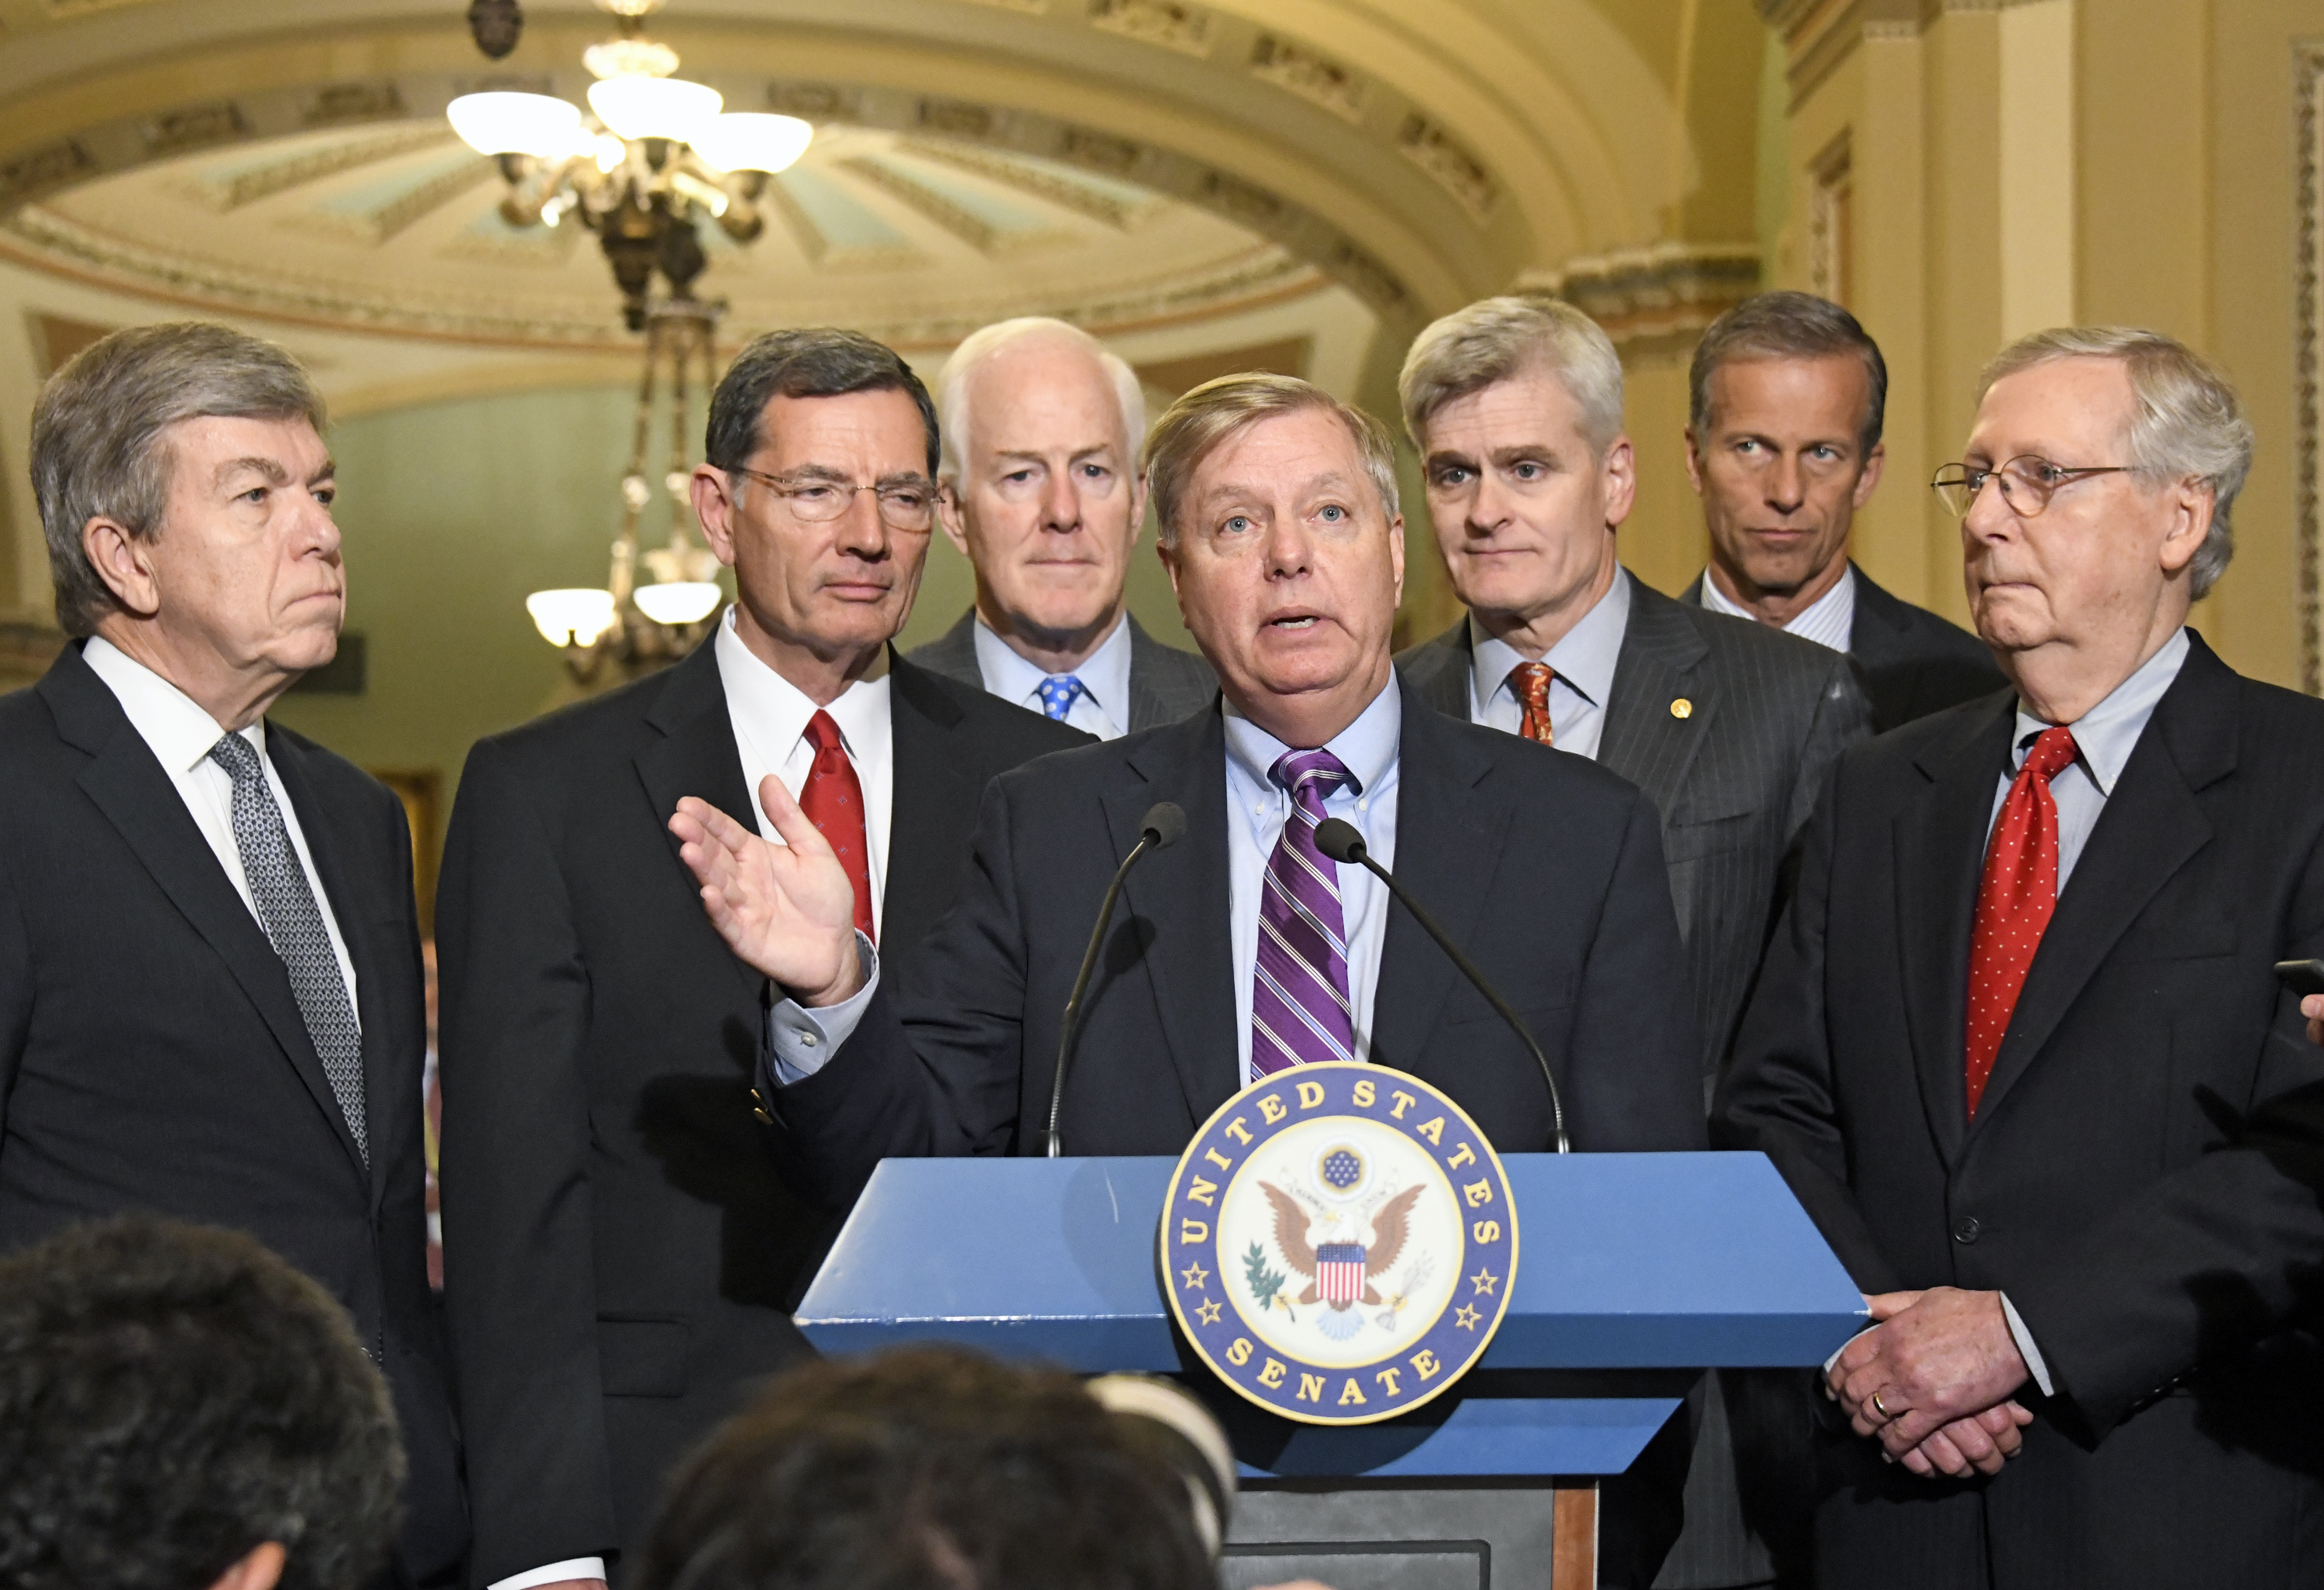 United States Senator Lindsey Graham (Republican of South Carolina) speaks to reporters outside the US Senate Chamber following the Republican weekly luncheon caucus in the US Capitol in Washington, DC on Sept.19, 2017. (Ron Sachs—AP Images)